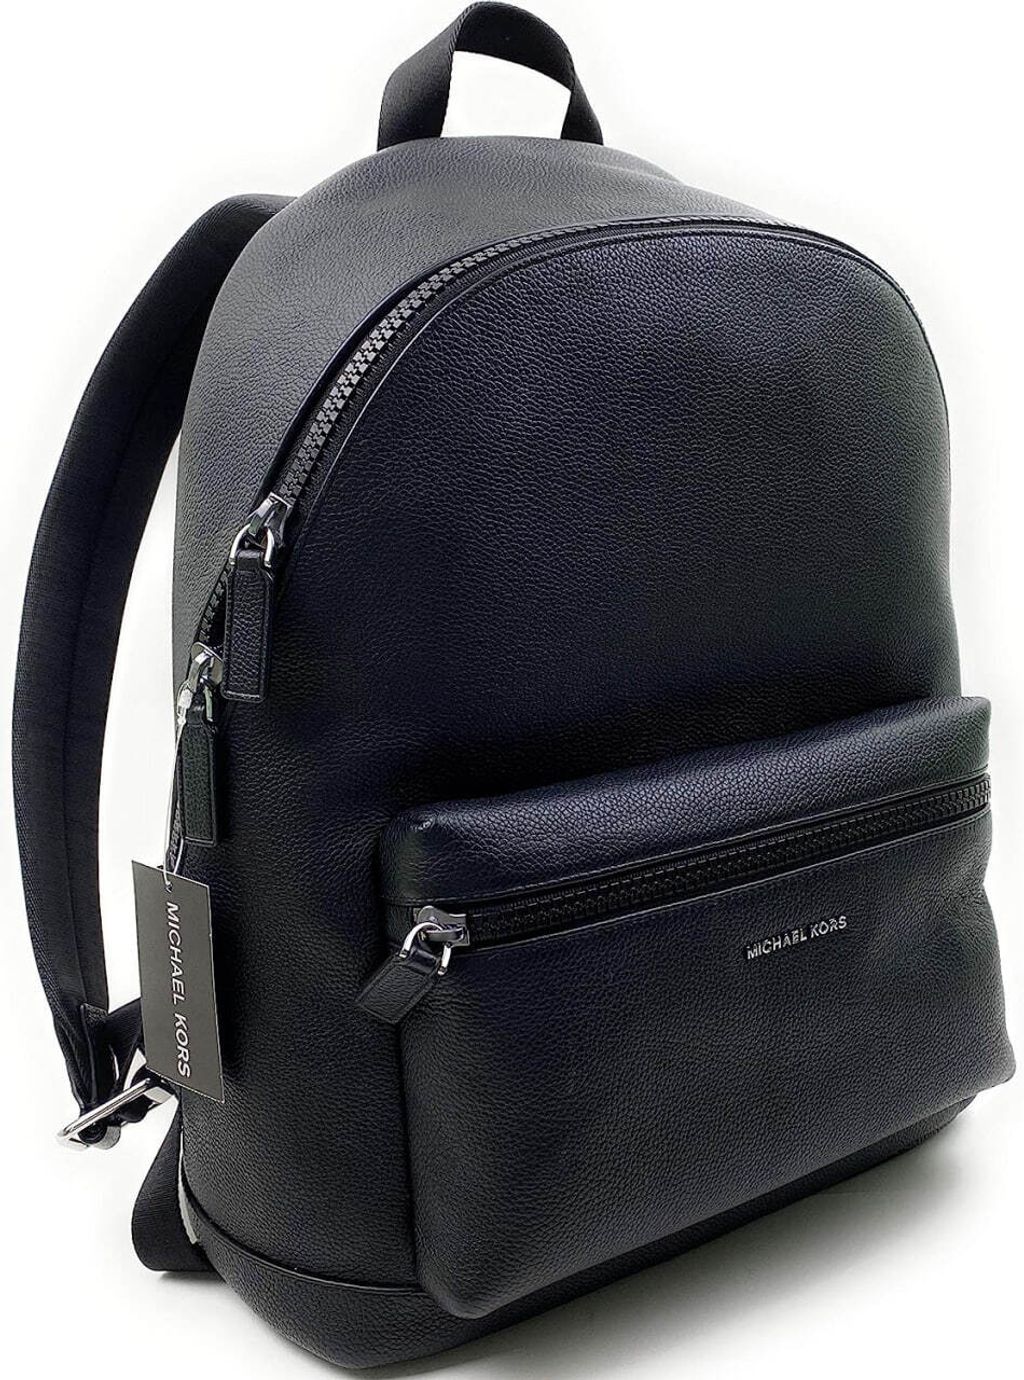 handbagbranded.com getlush outlet personalshopper usa malaysia ready stock Coach Malaysia MICHAEL KORS MENS Cooper Backpack Bag Pebbled Leather